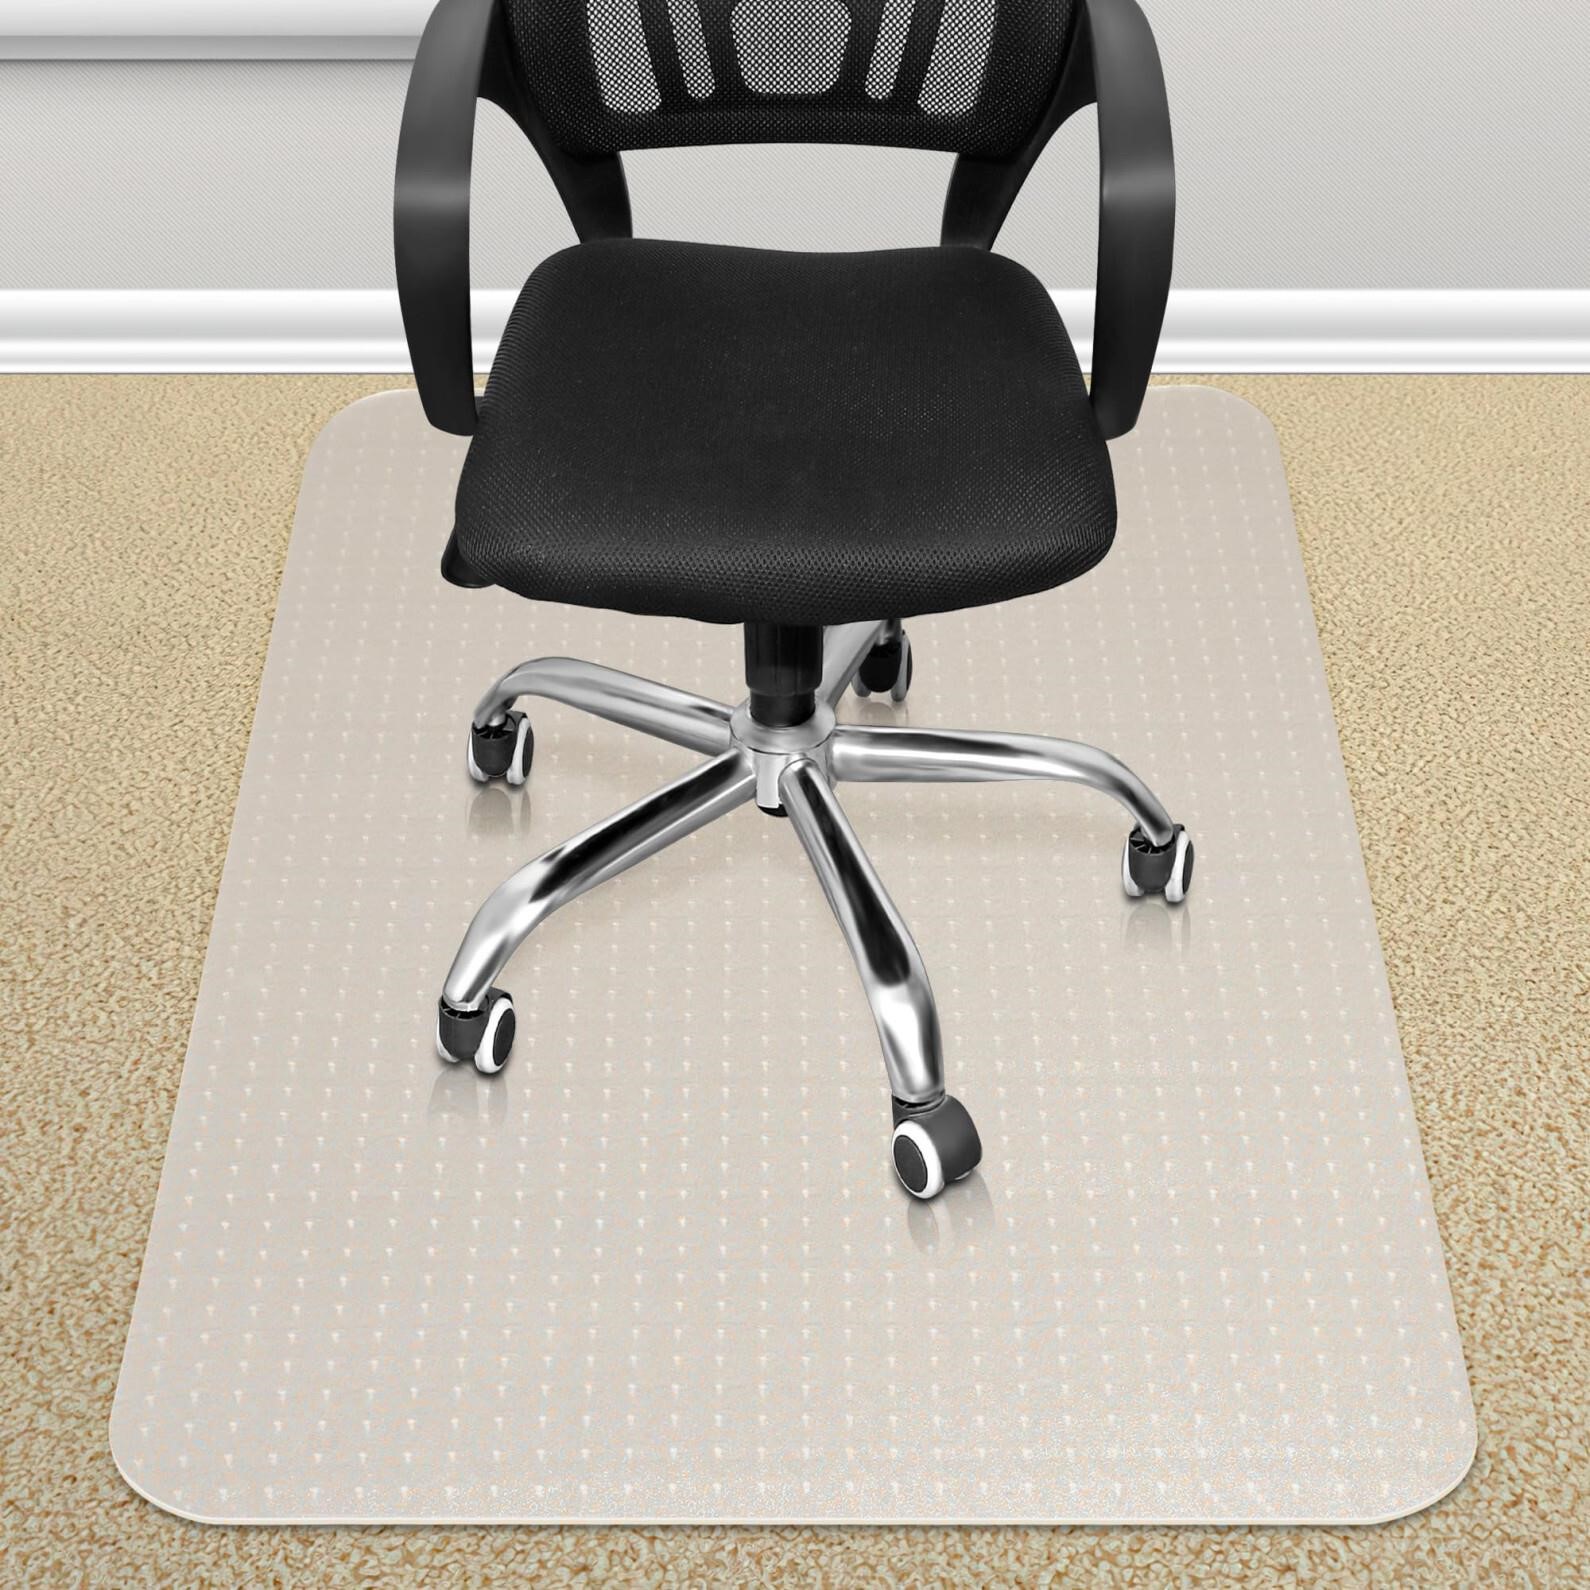 Skywerc Chair Mat for Carpeted Floors, 48"x48" Of